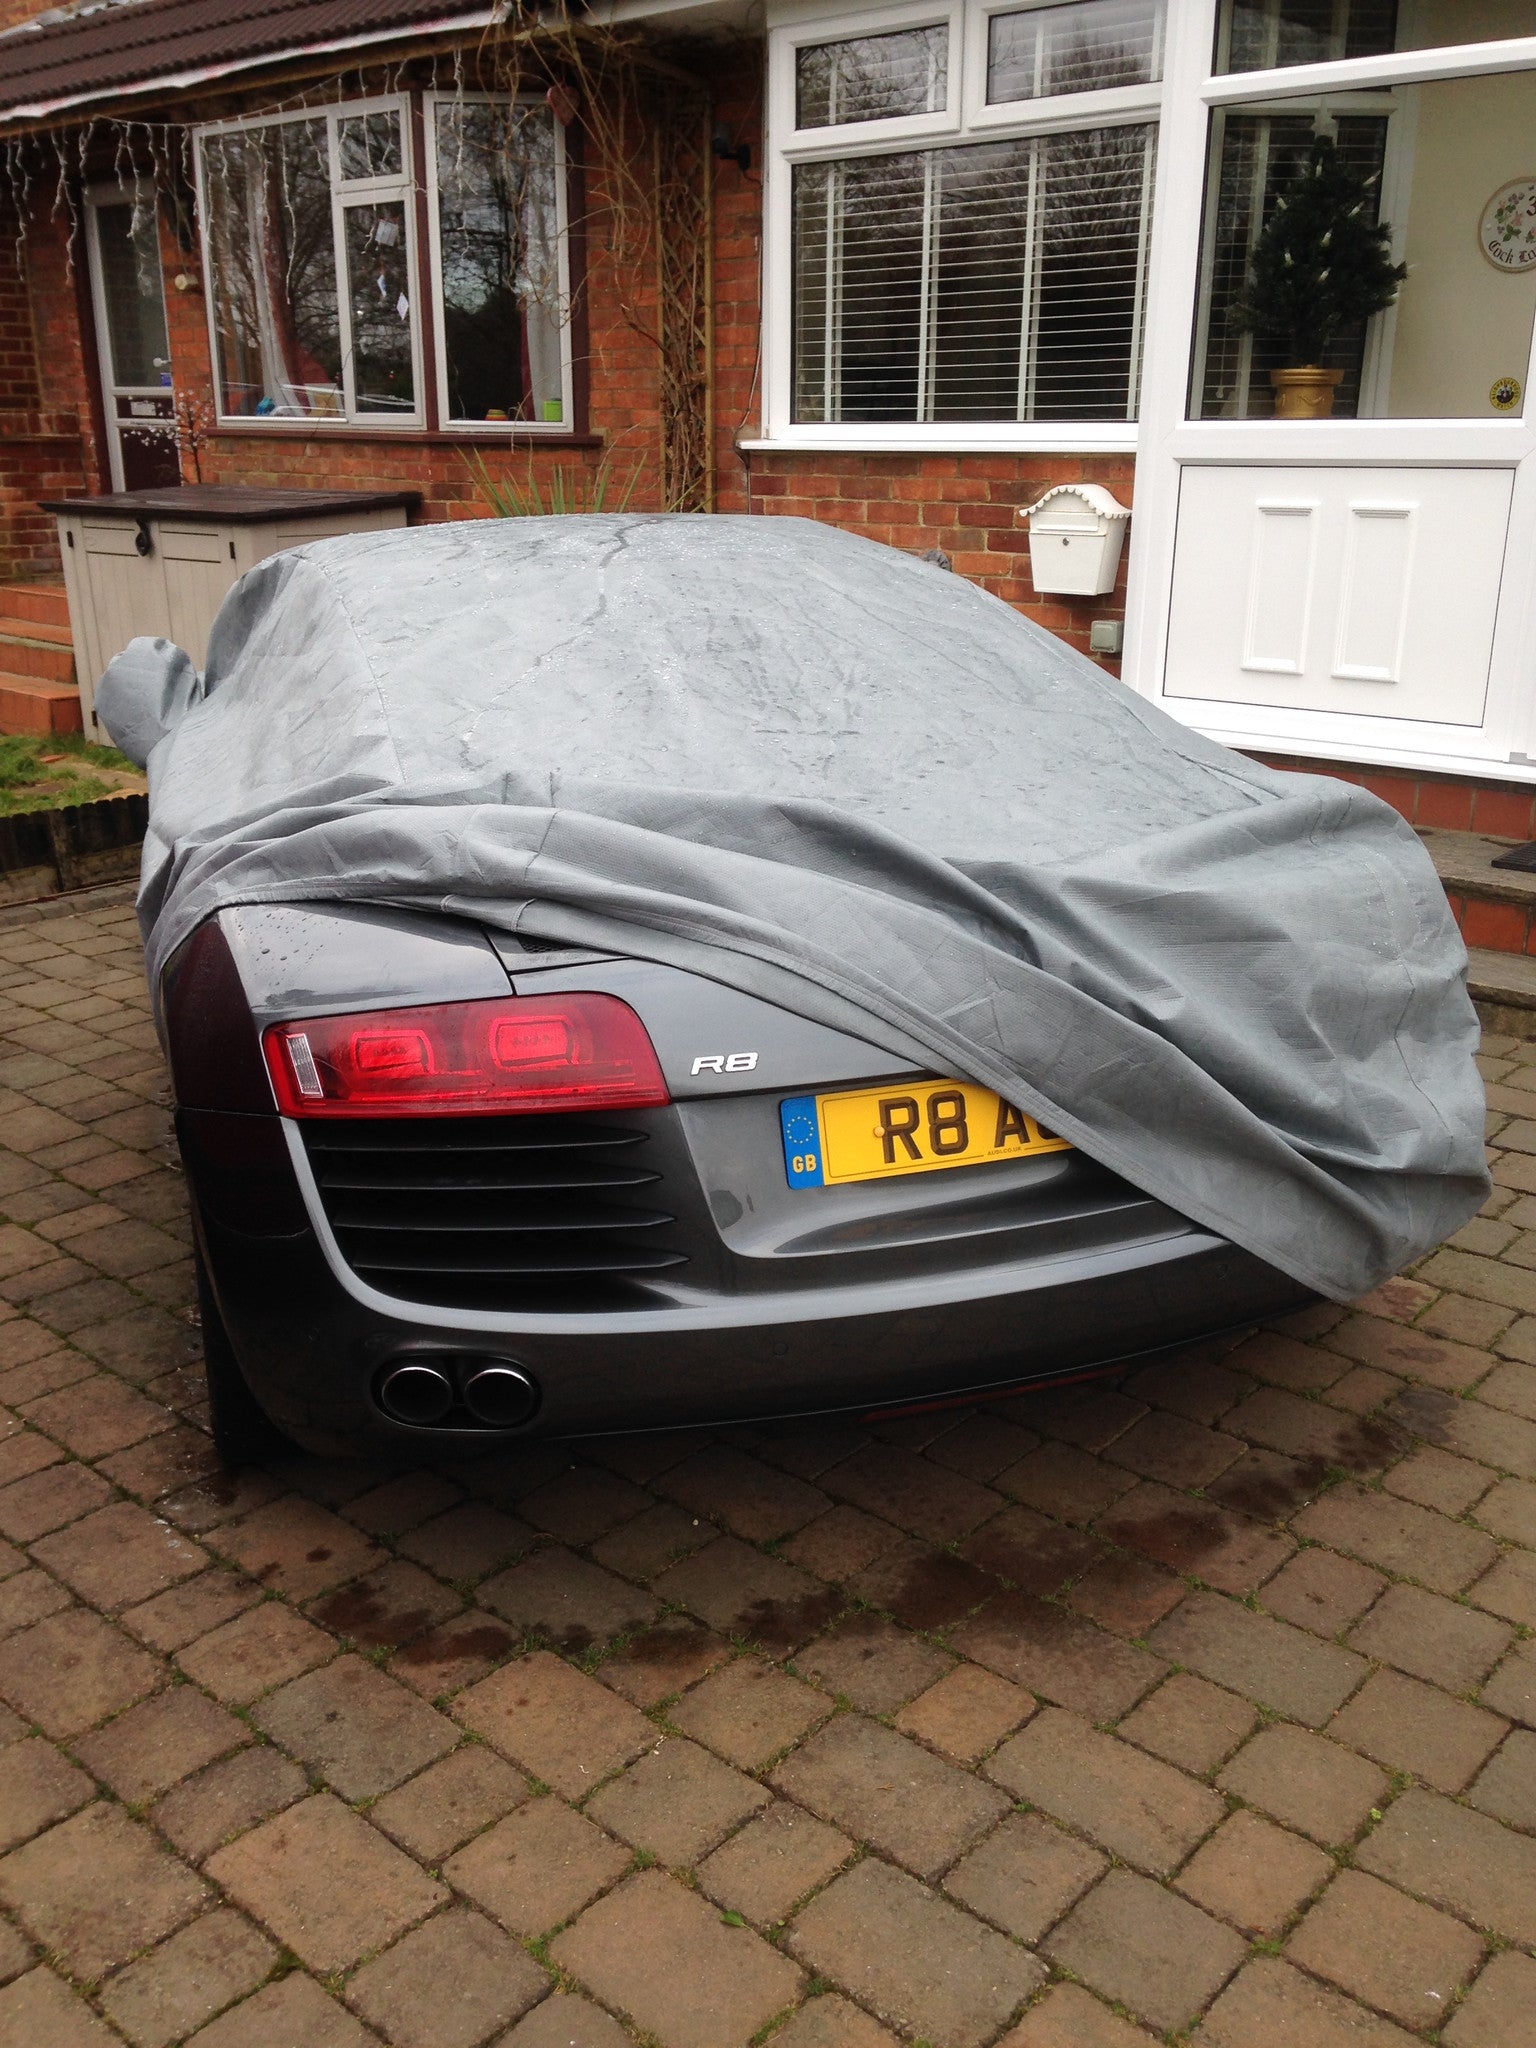 Outdoor car cover fits Audi RS3 Sportback 100% waterproof now